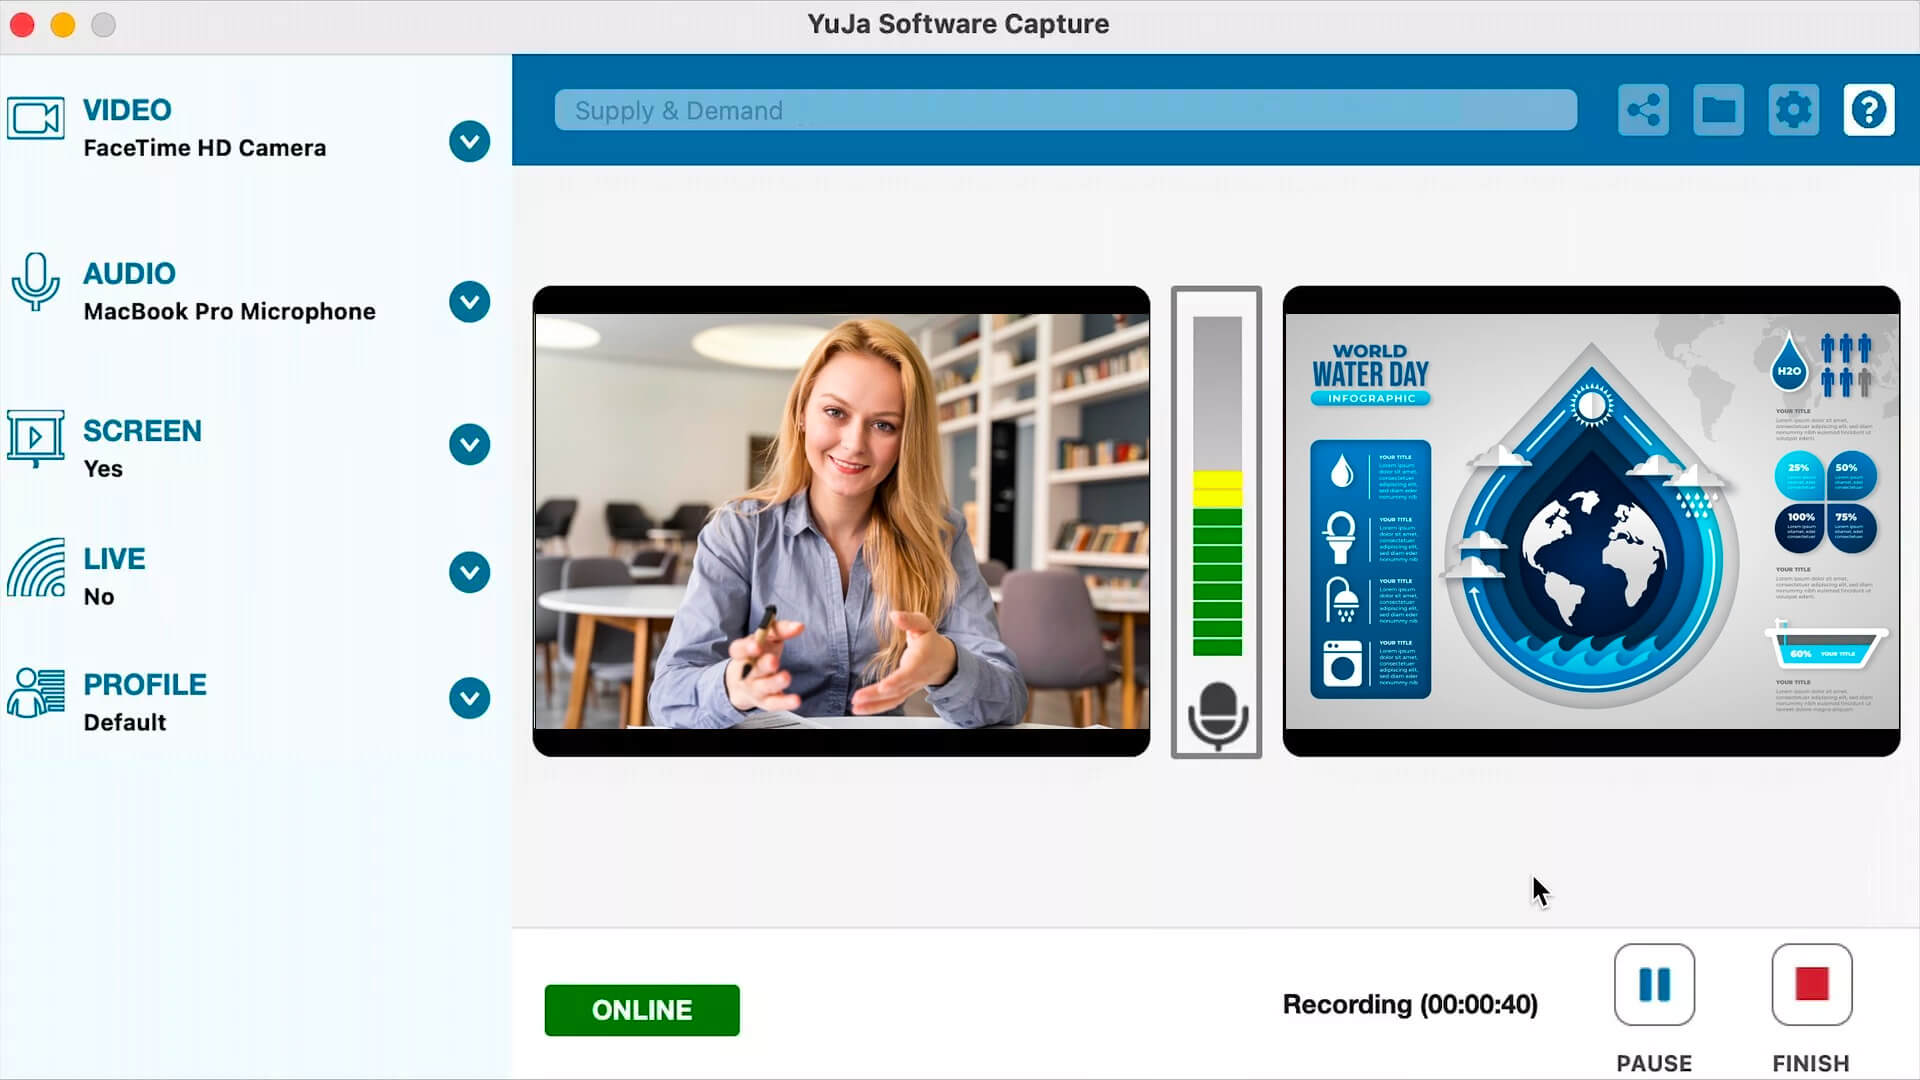 The YuJa Software Capture screen showing a woman waving and a presentation and source settings.